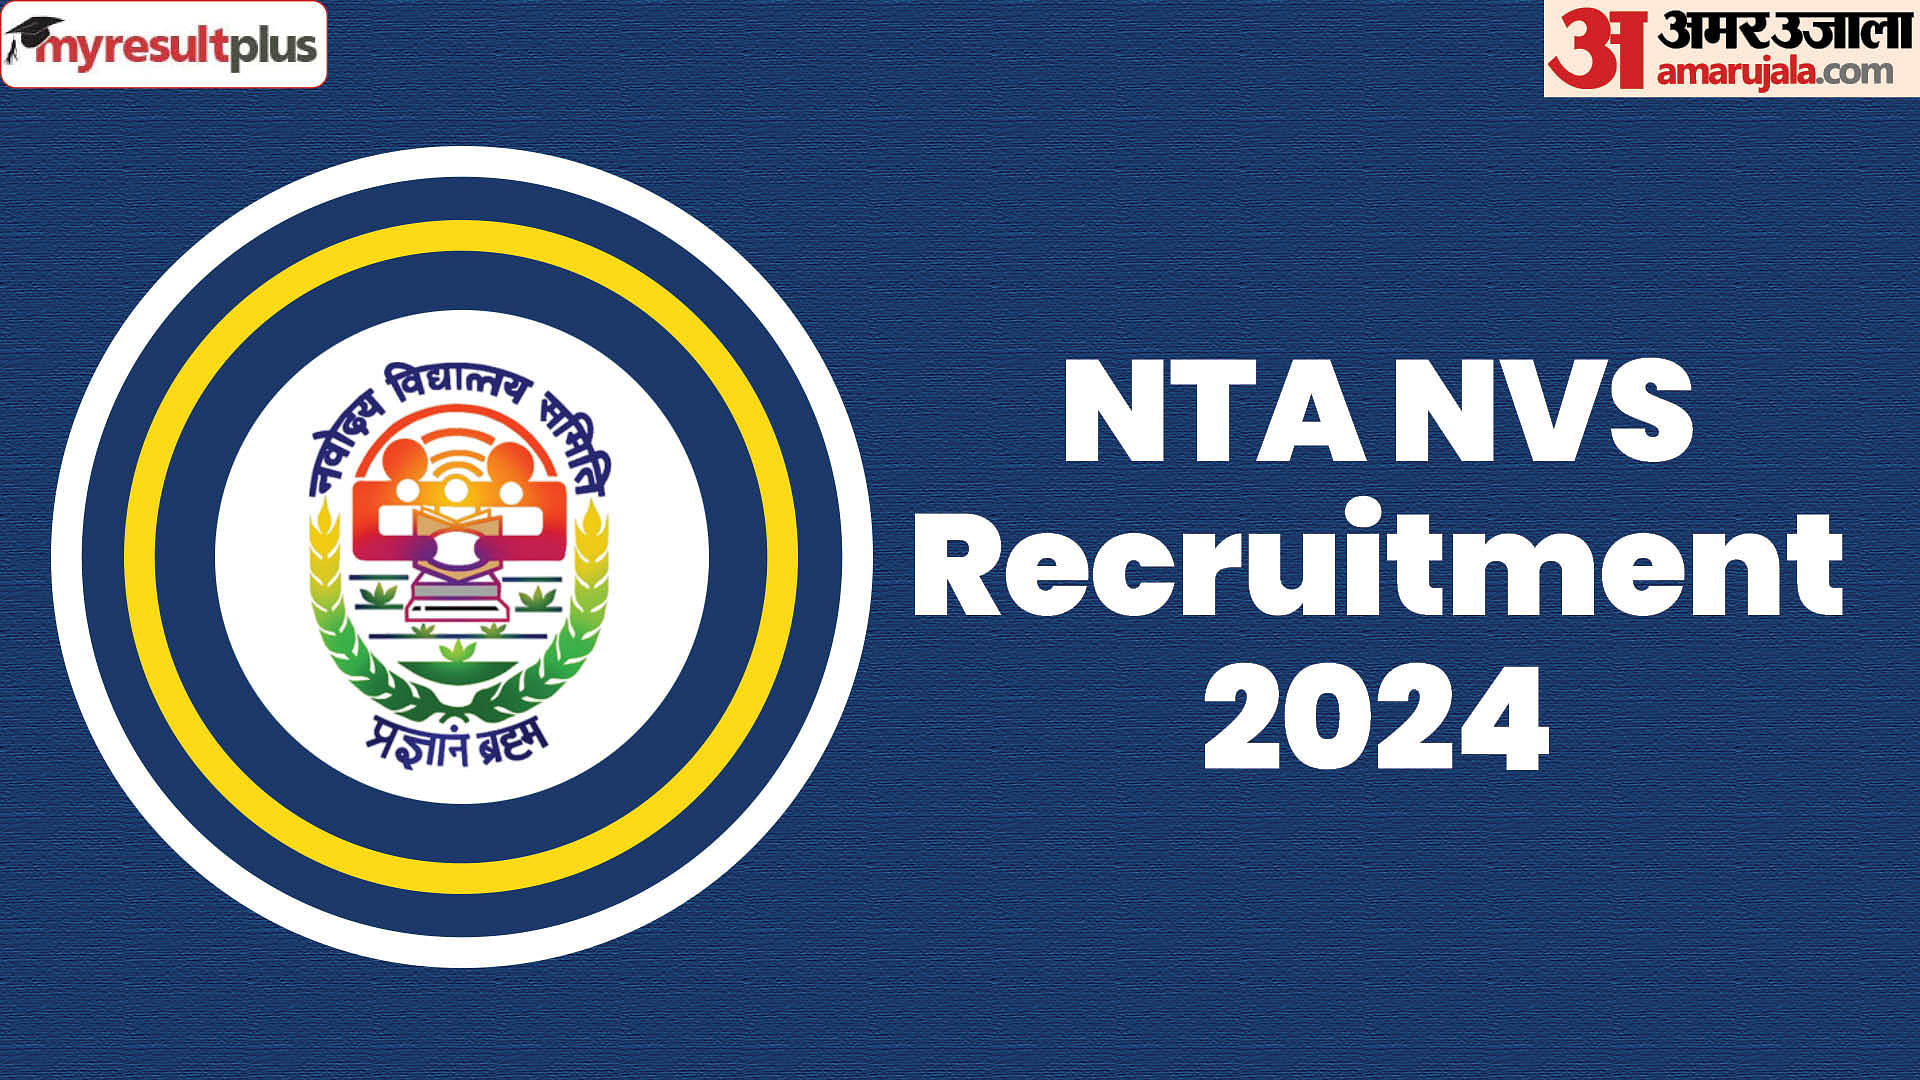 NVS Recruitment 2024: Application correction window closing today, Read the steps to make changes here